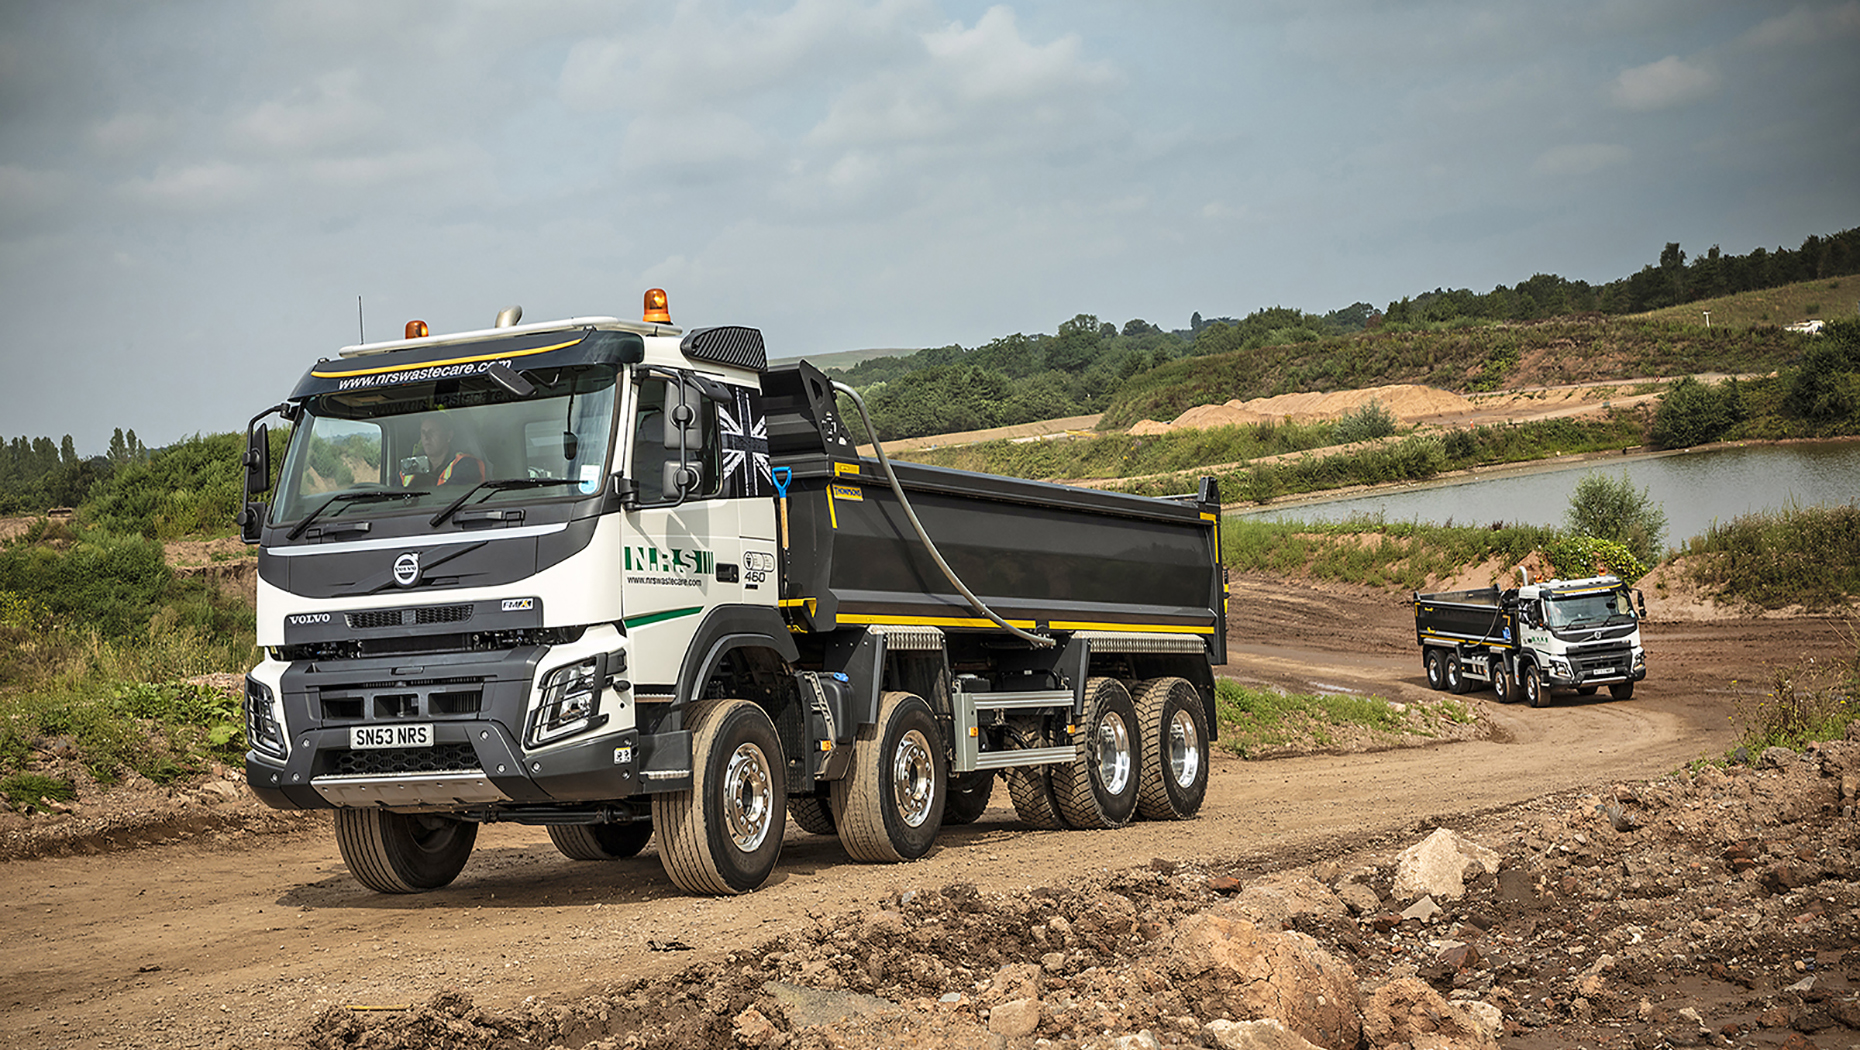 New Volvo FMX tippers for NRS Ltd